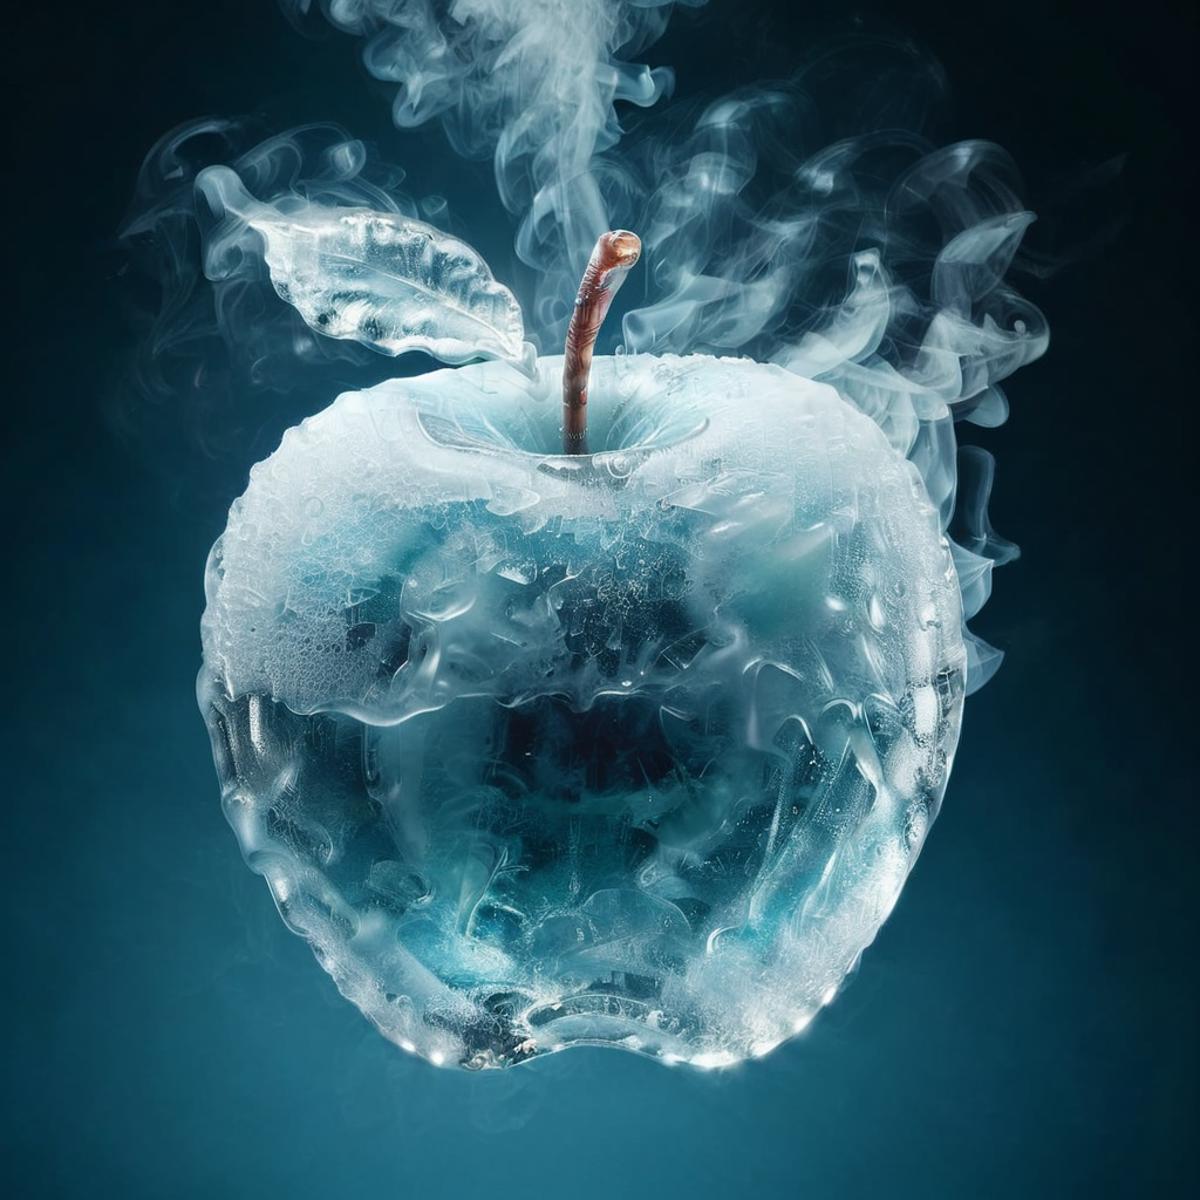 A blue and white apple with a stem and a bite taken out of it, with smoke coming out of it.